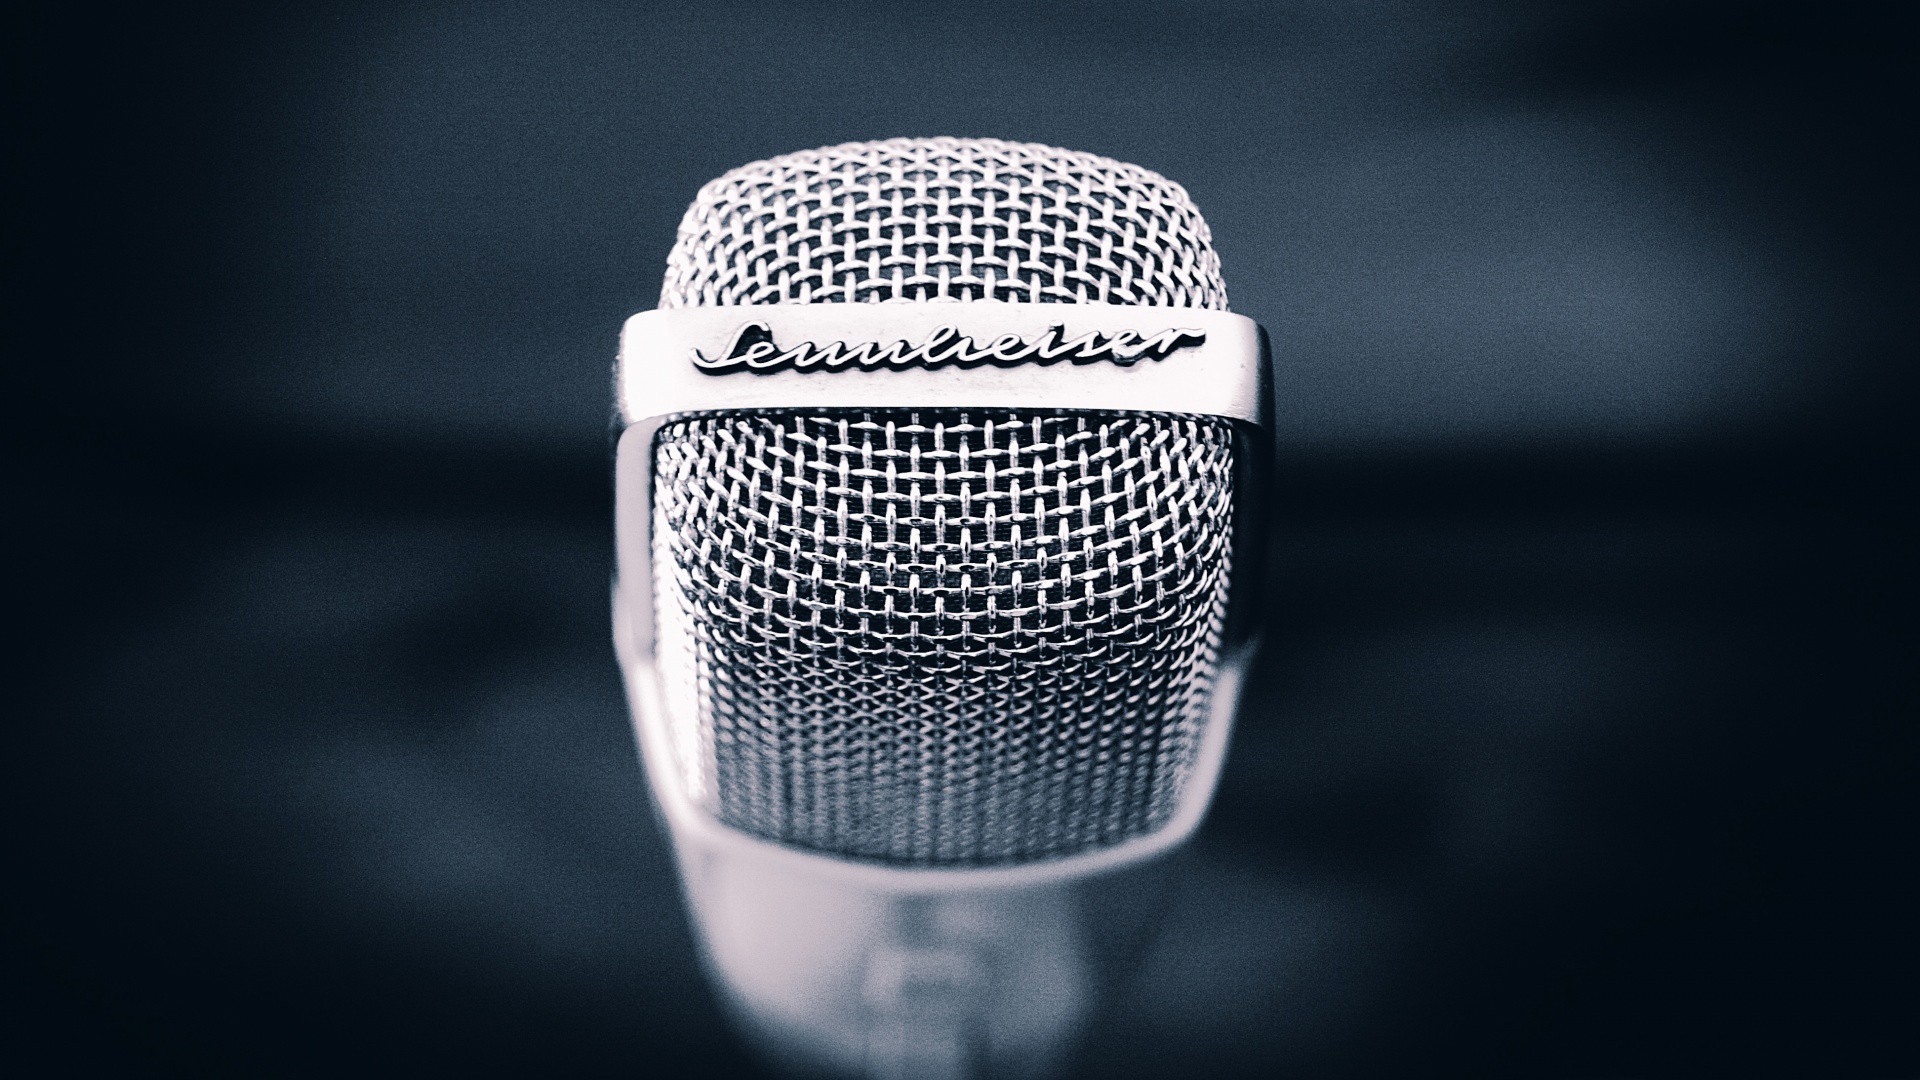 Microphone Photos Download The BEST Free Microphone Stock Photos  HD  Images